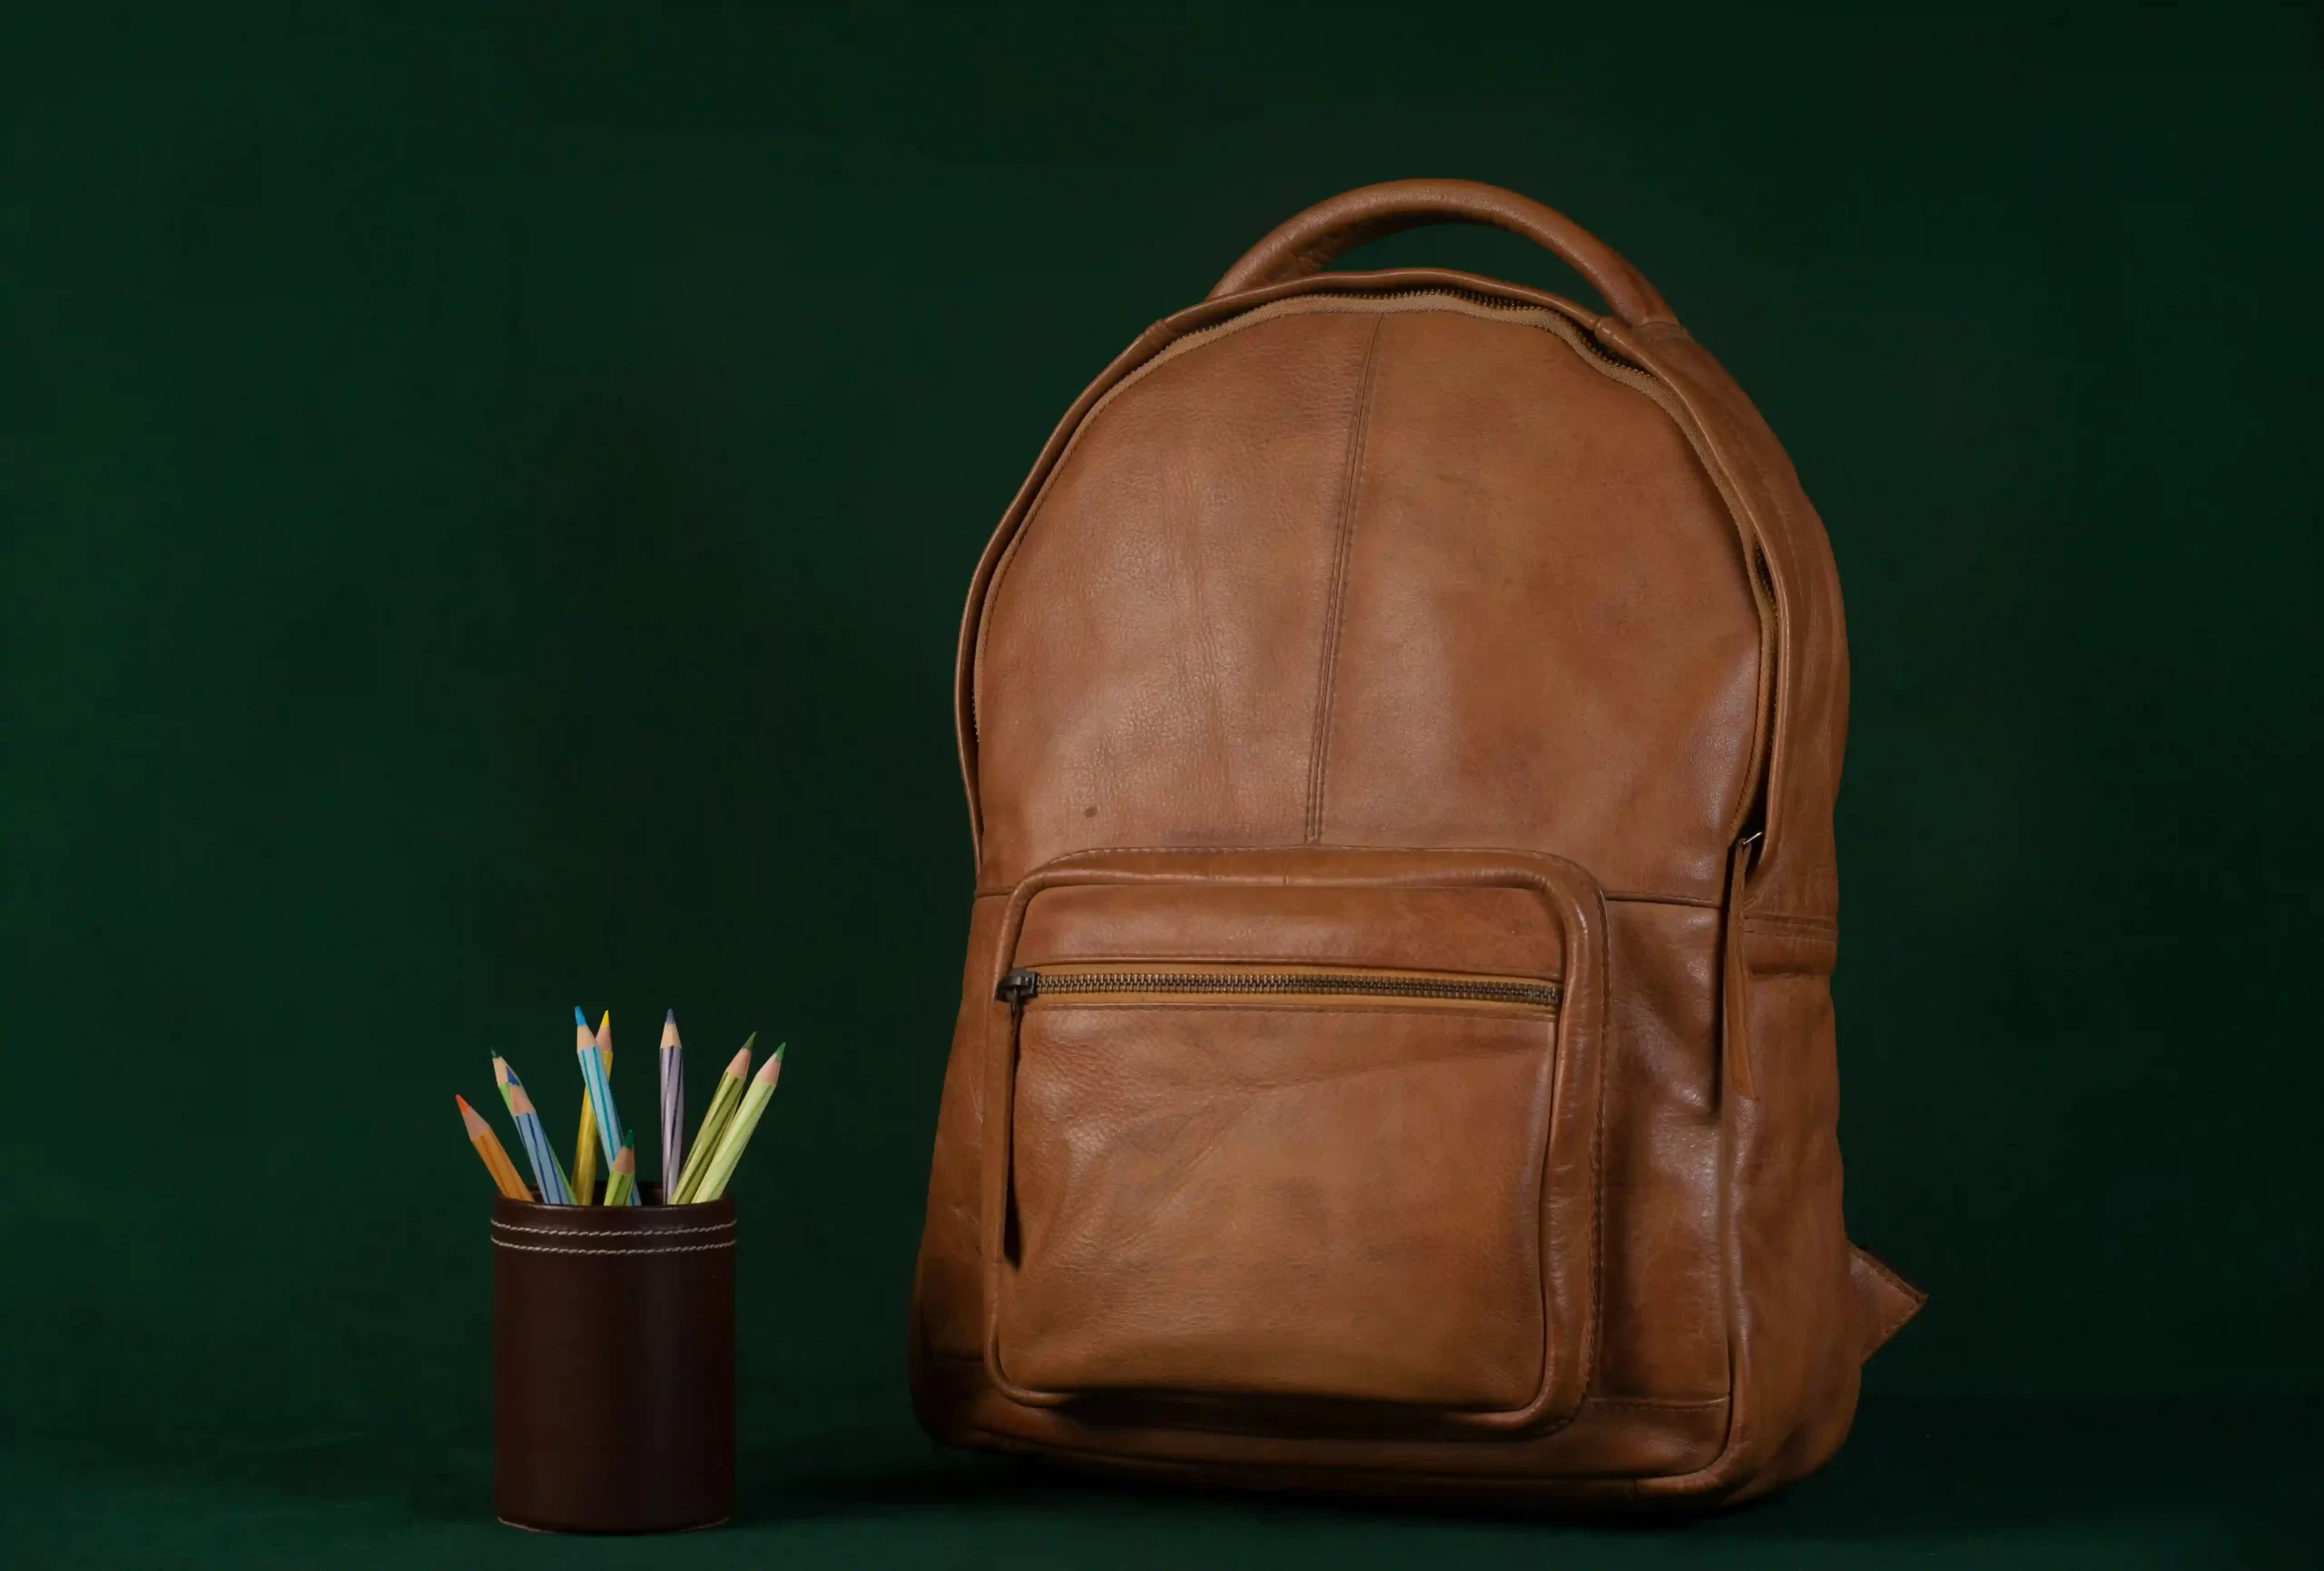 TWO TONE LEATHER BACKPACK